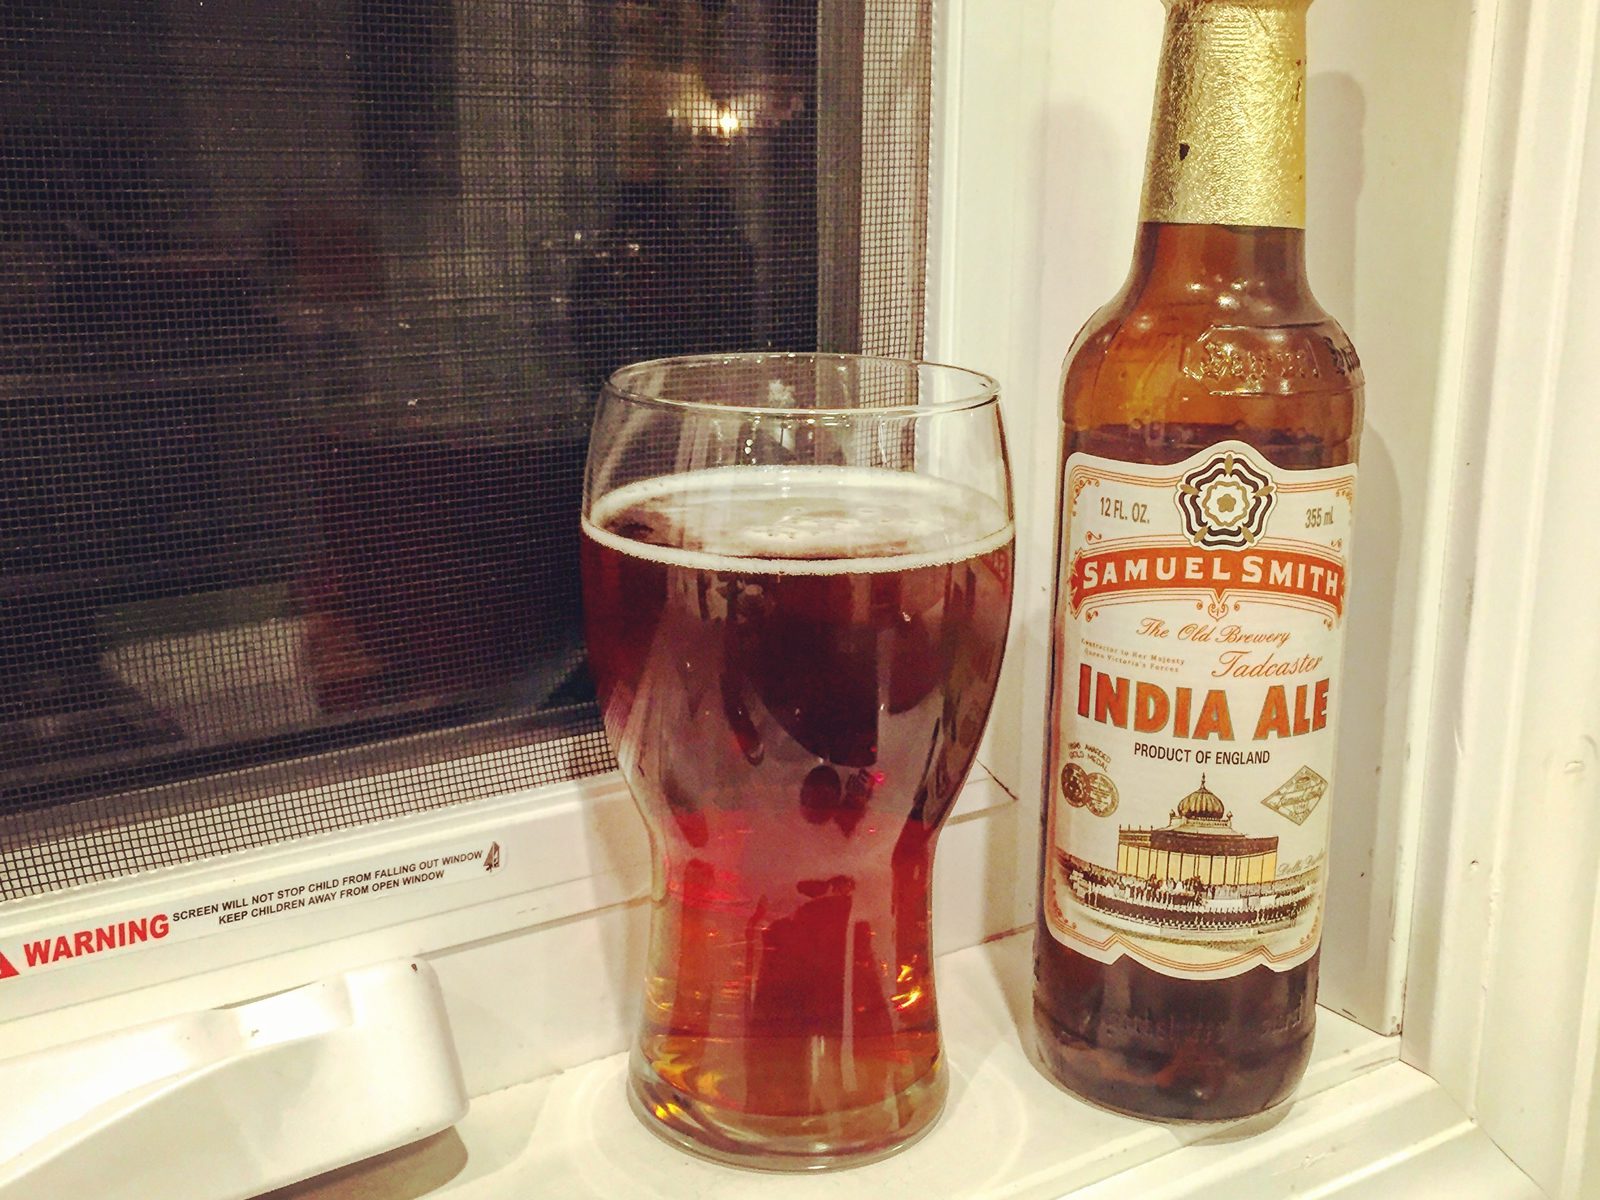 Samuel Smith's Old Brewery: India Ale